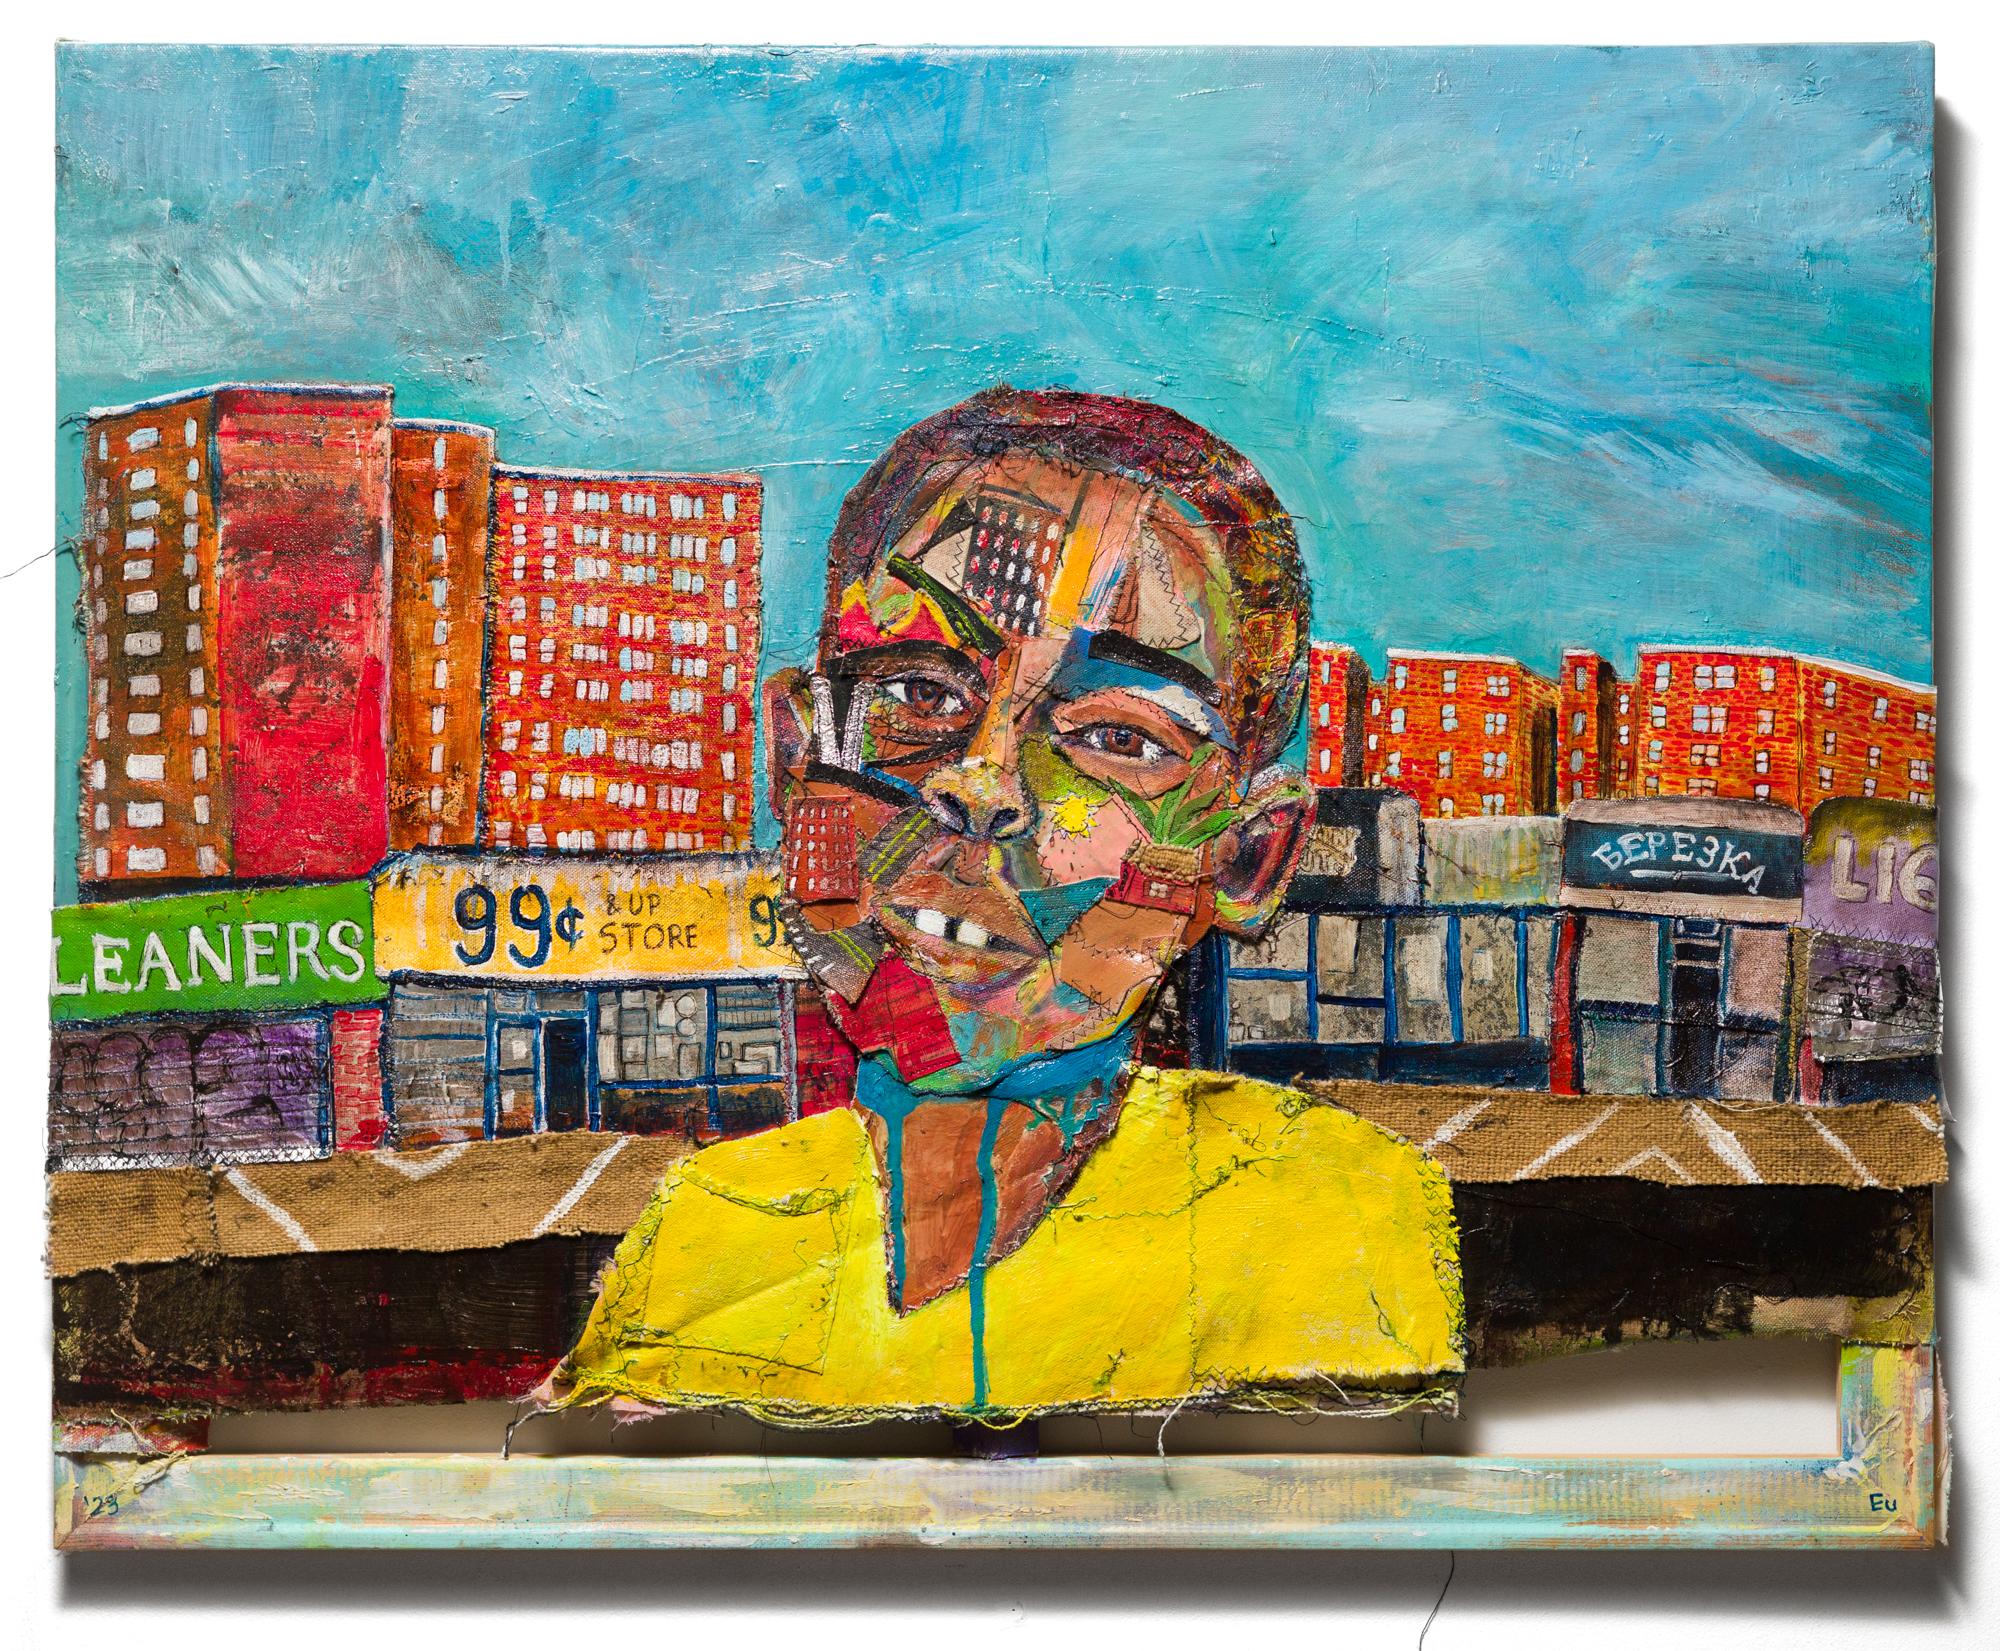 "Oceans Apart", Sewn Mixed Media, Child Figure, Portrait, Textiles, City Scape - Painting by Eustace Mamba